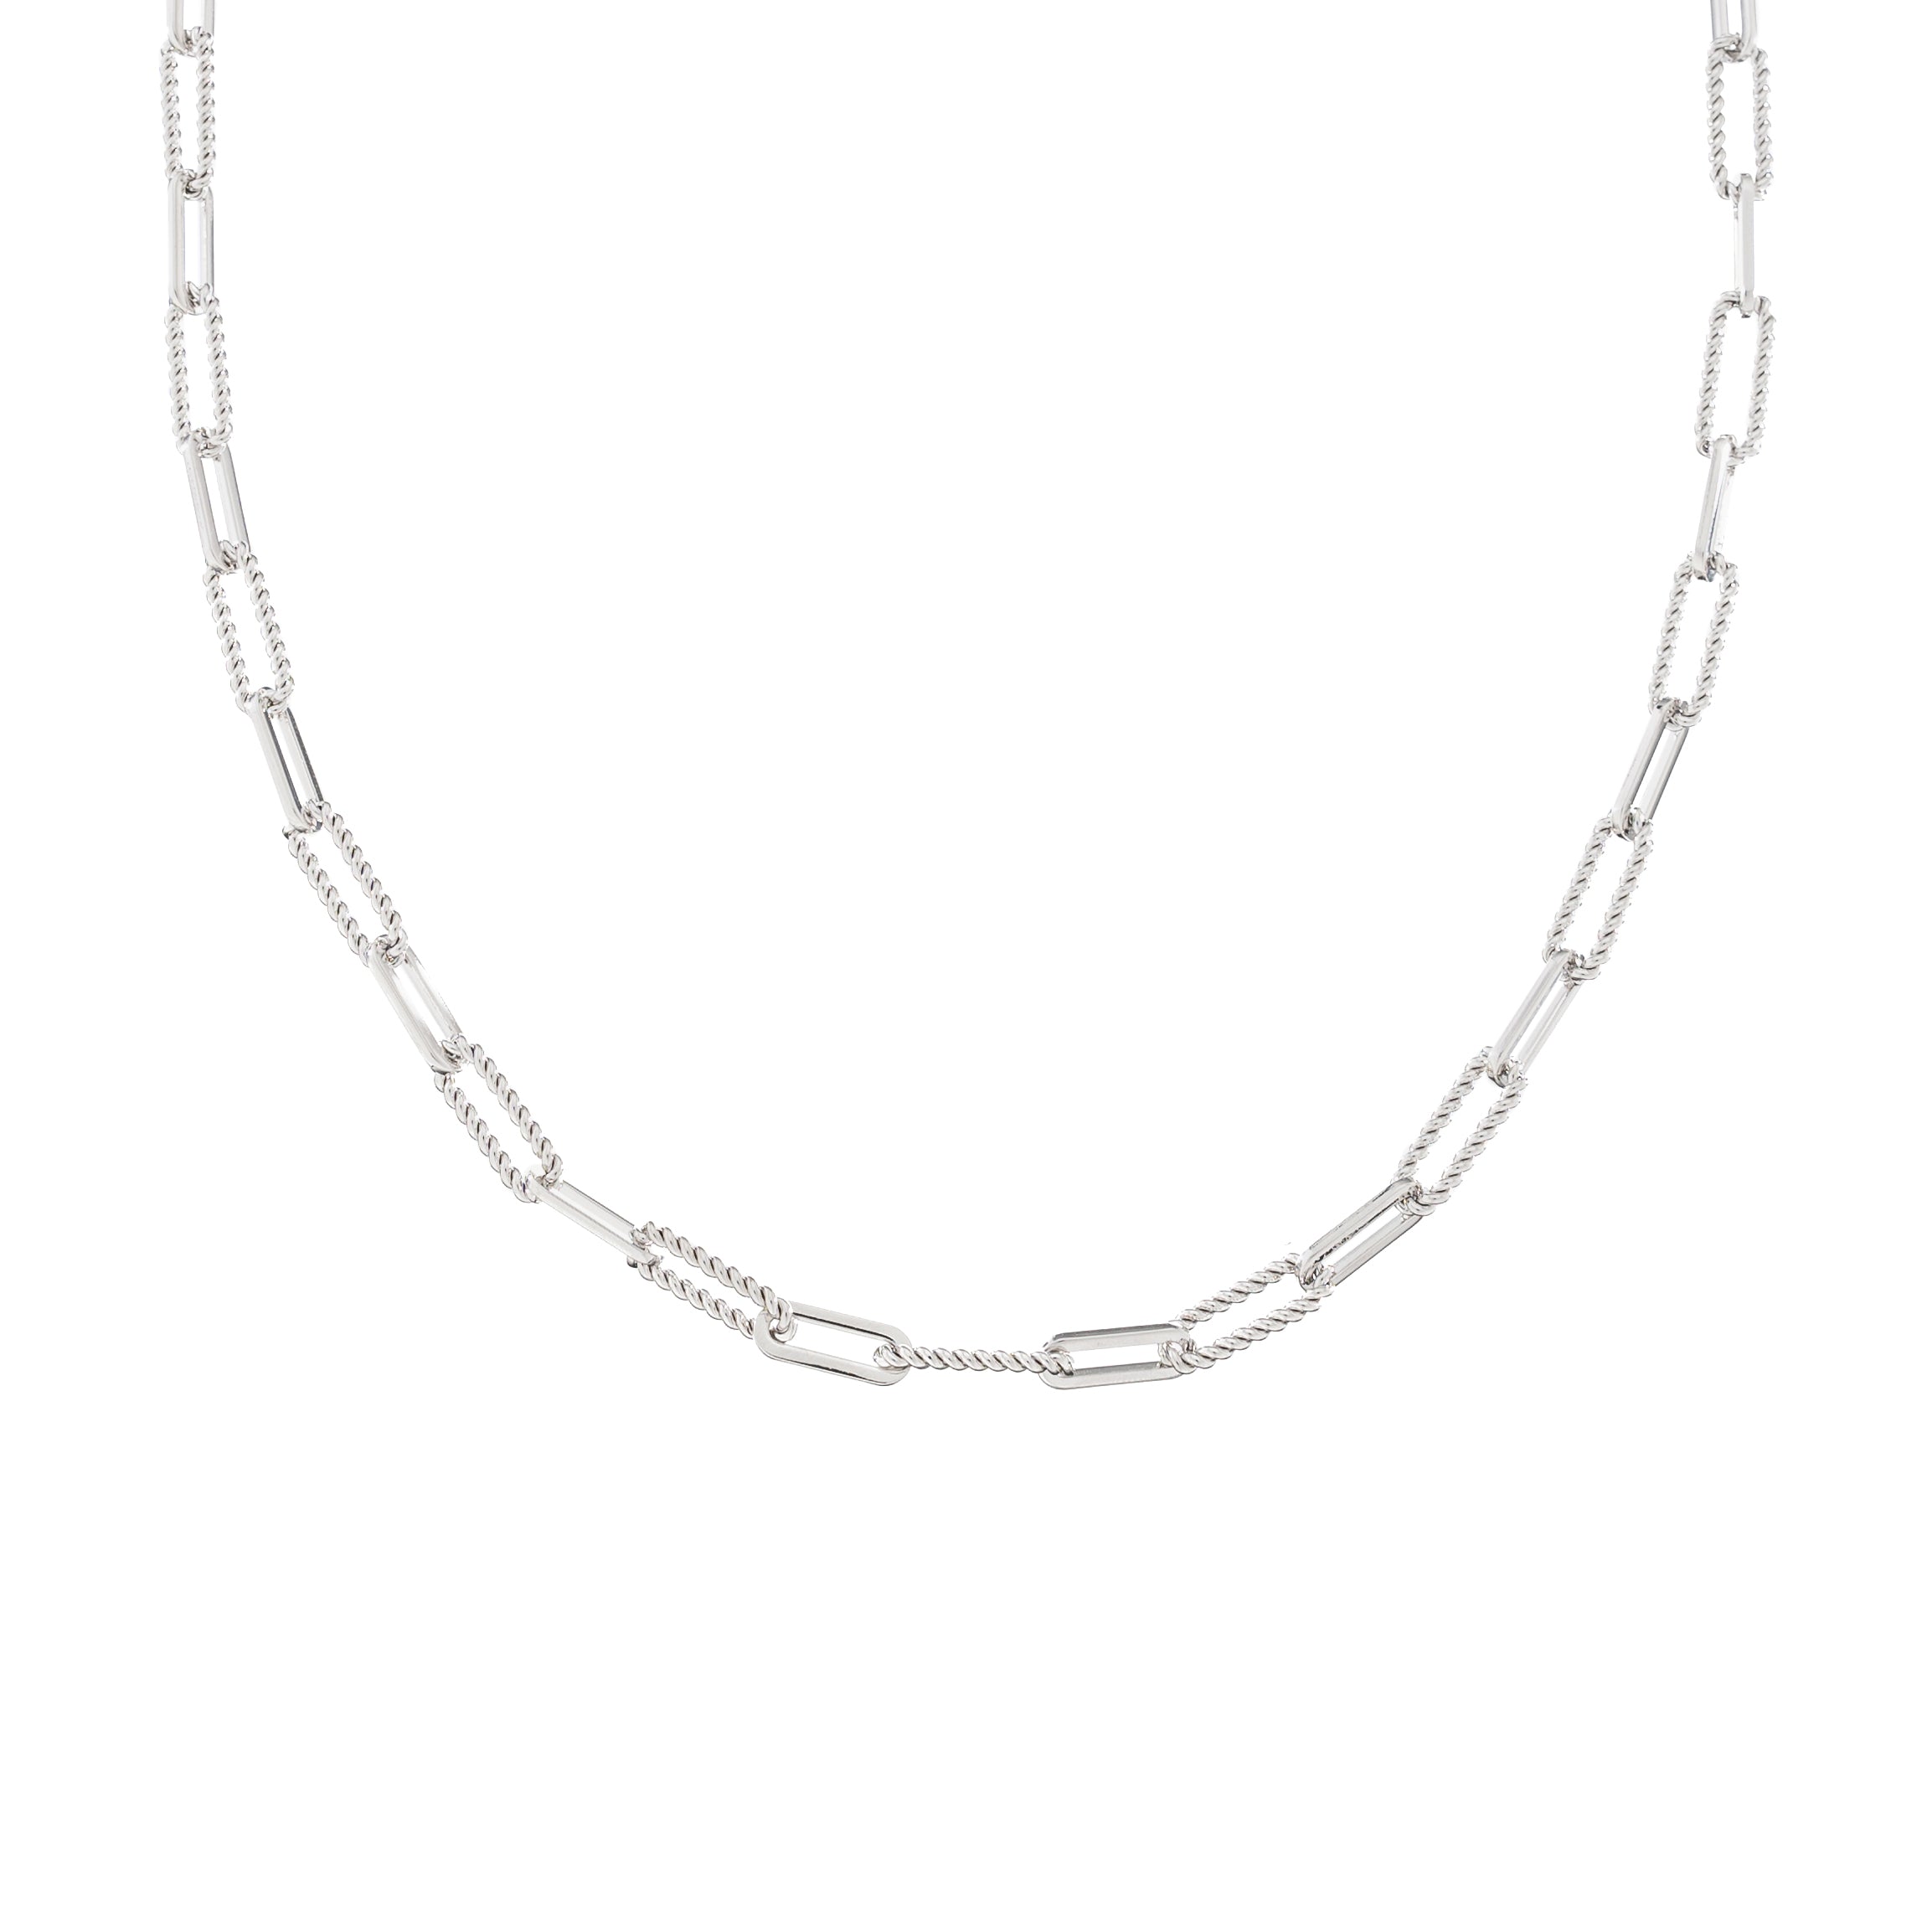 Silver Twisted Links Necklace – Brenda Grands Jewelry